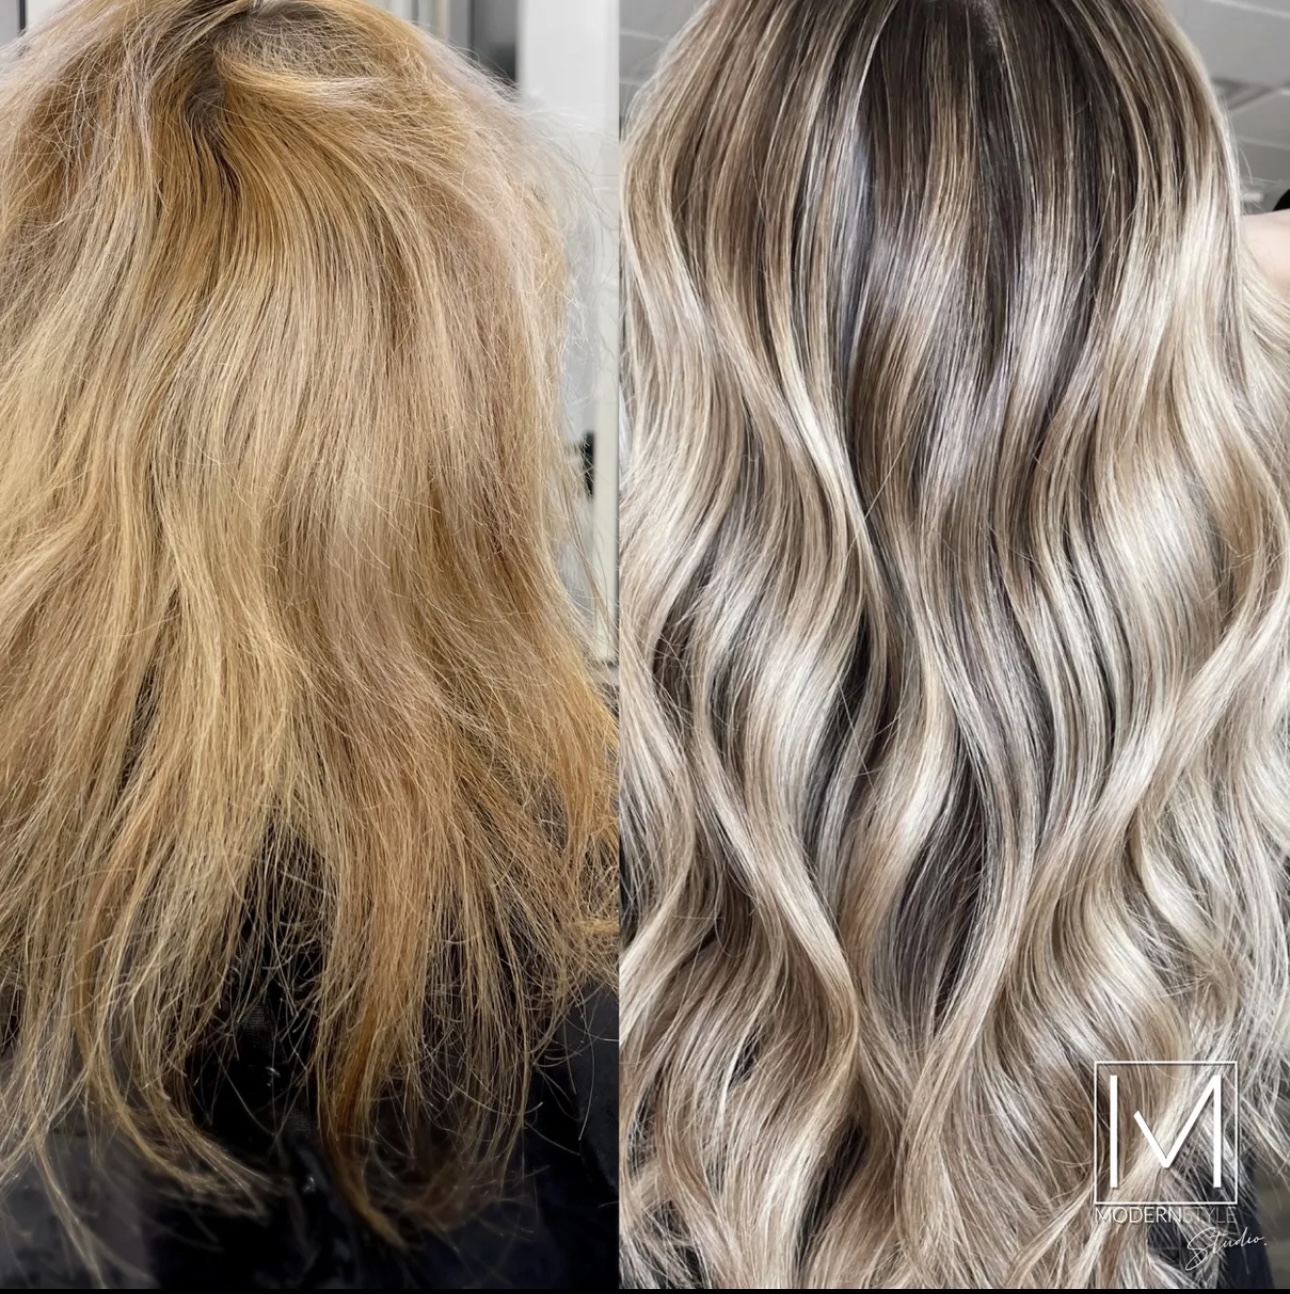 Hair extensions near me, color correction near me, blonde specialist, hand tied extensions near me